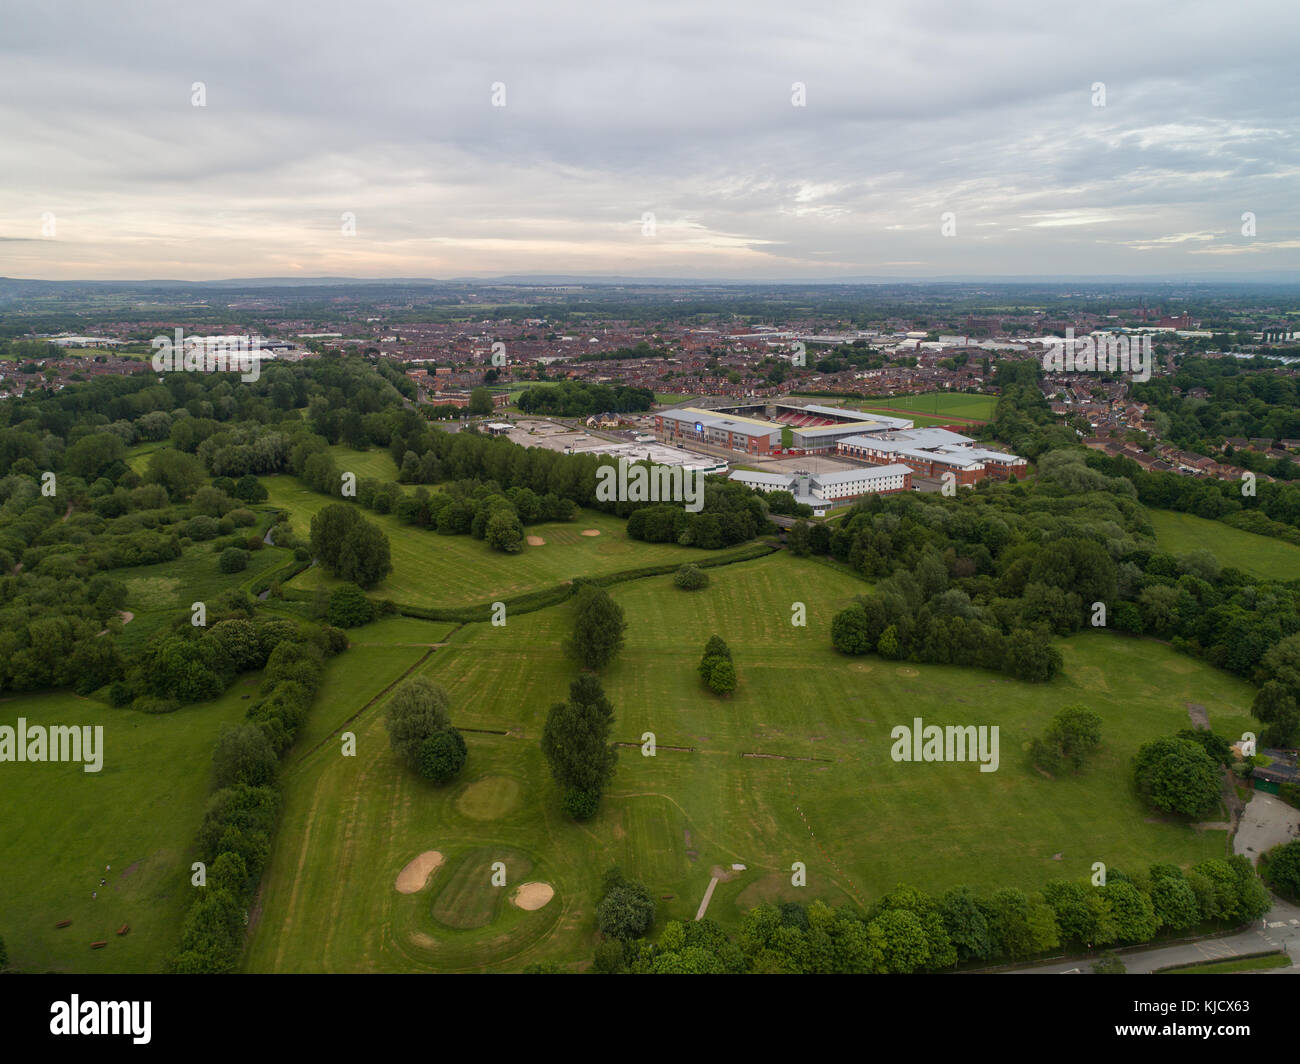 Aerial View Of Leigh Sports Village With Morrisons Supermarket And Holiday Inn Express in Leigh, Greater Manchester, England, UK Stock Photo